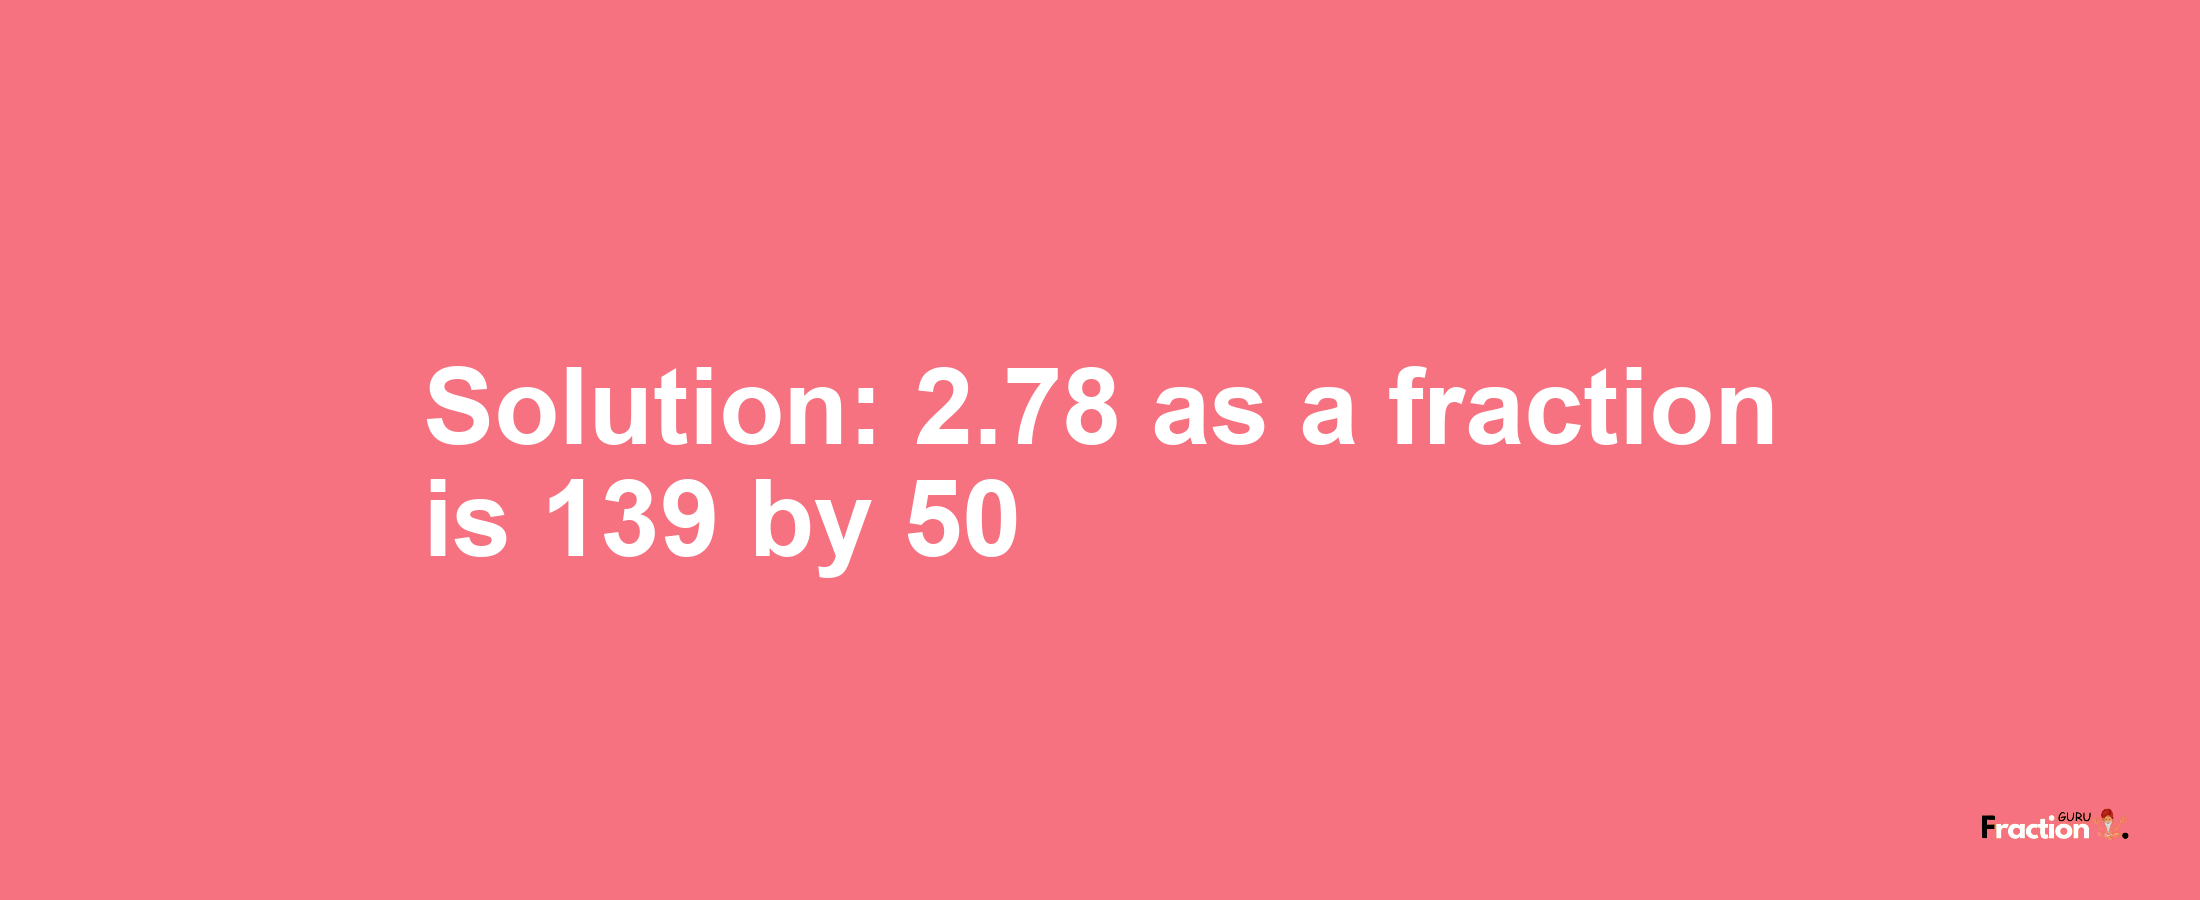 Solution:2.78 as a fraction is 139/50